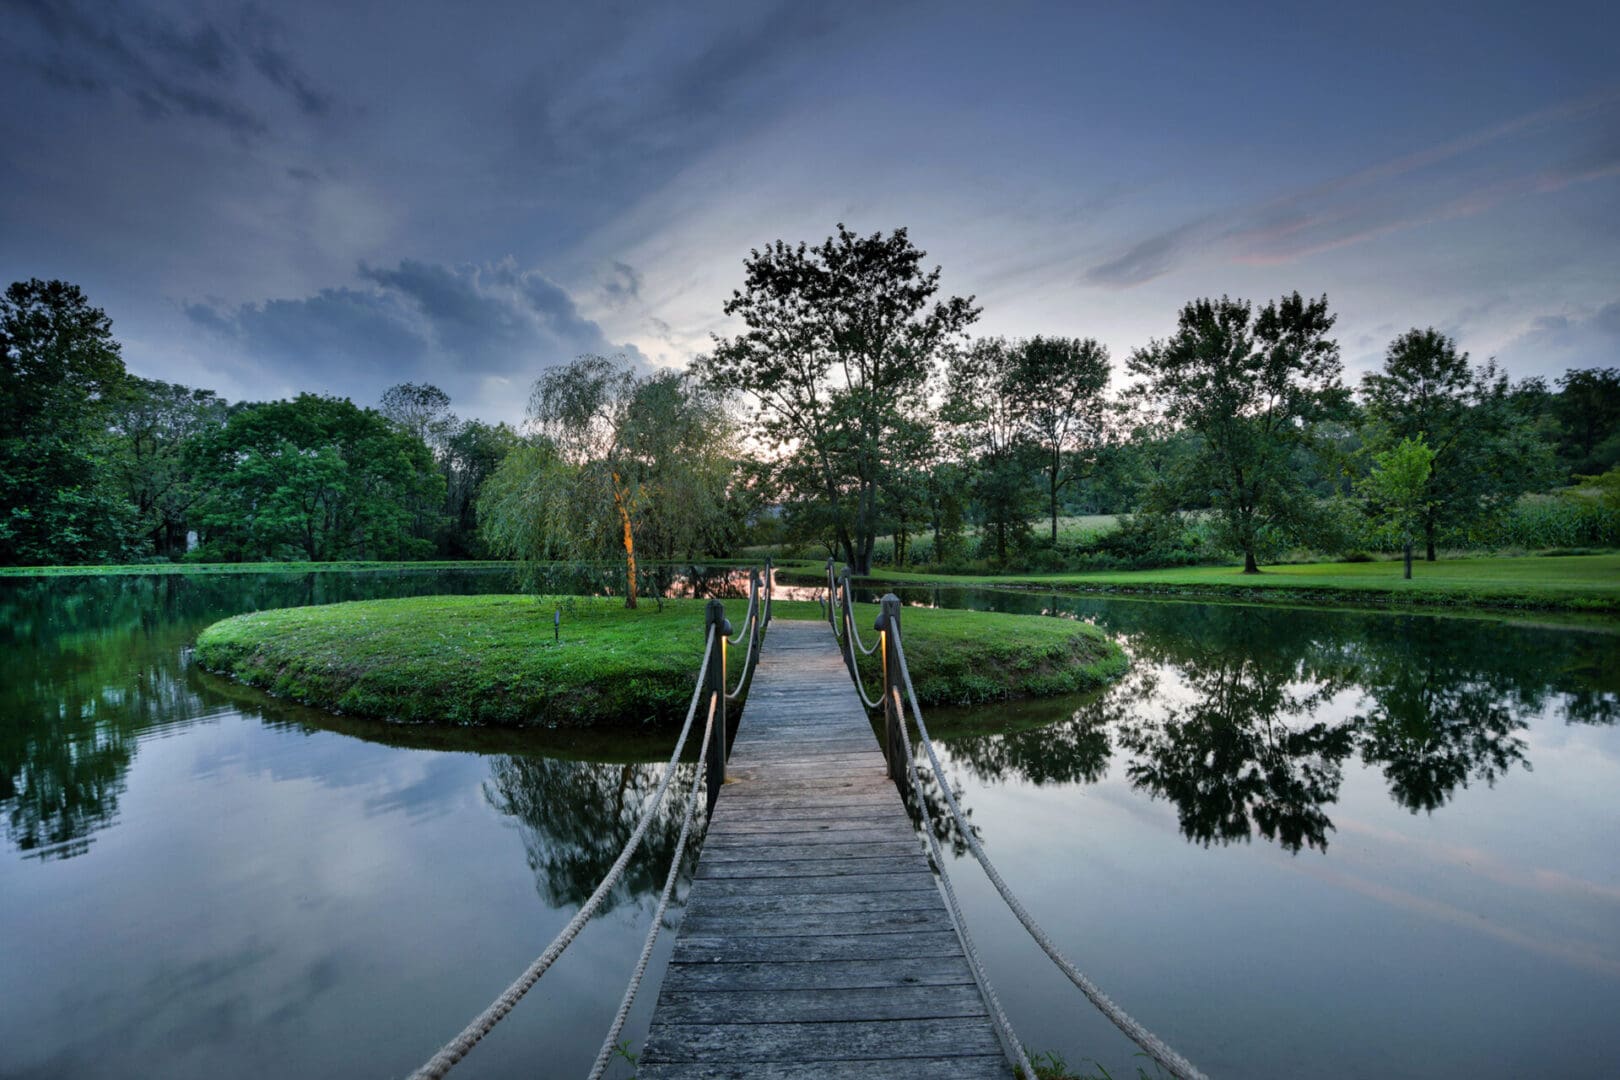 A wooden bridge over a pond at dusk, enhanced by enchanting outdoor lighting.